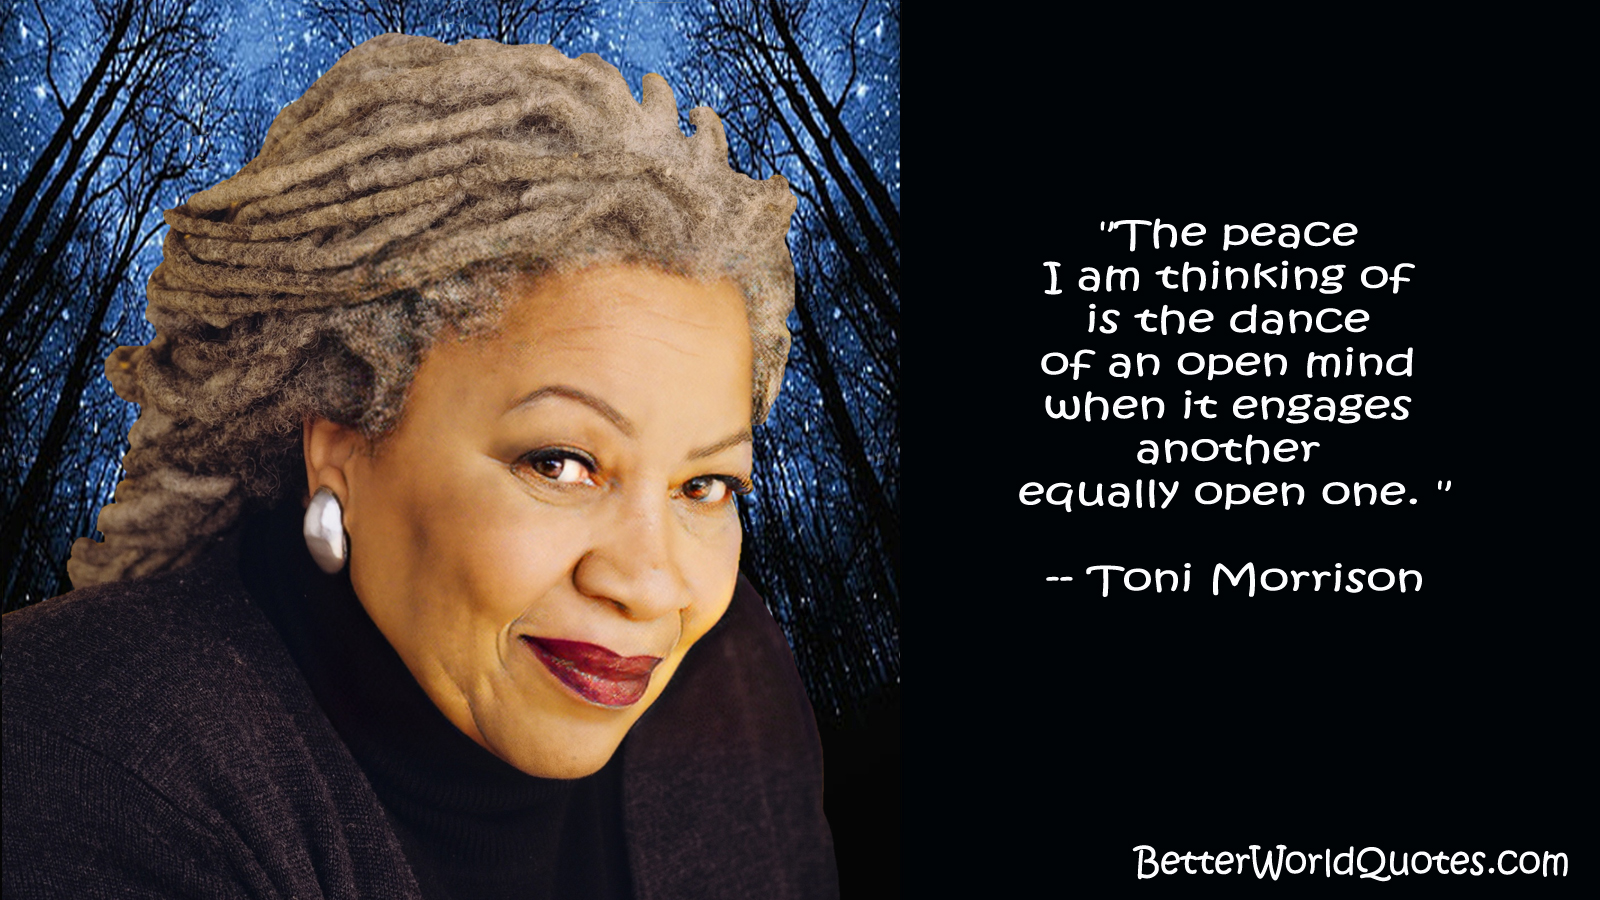 Toni Morrison: The peace I am thinking of is the dance of an open mind when it engages another equally open one.